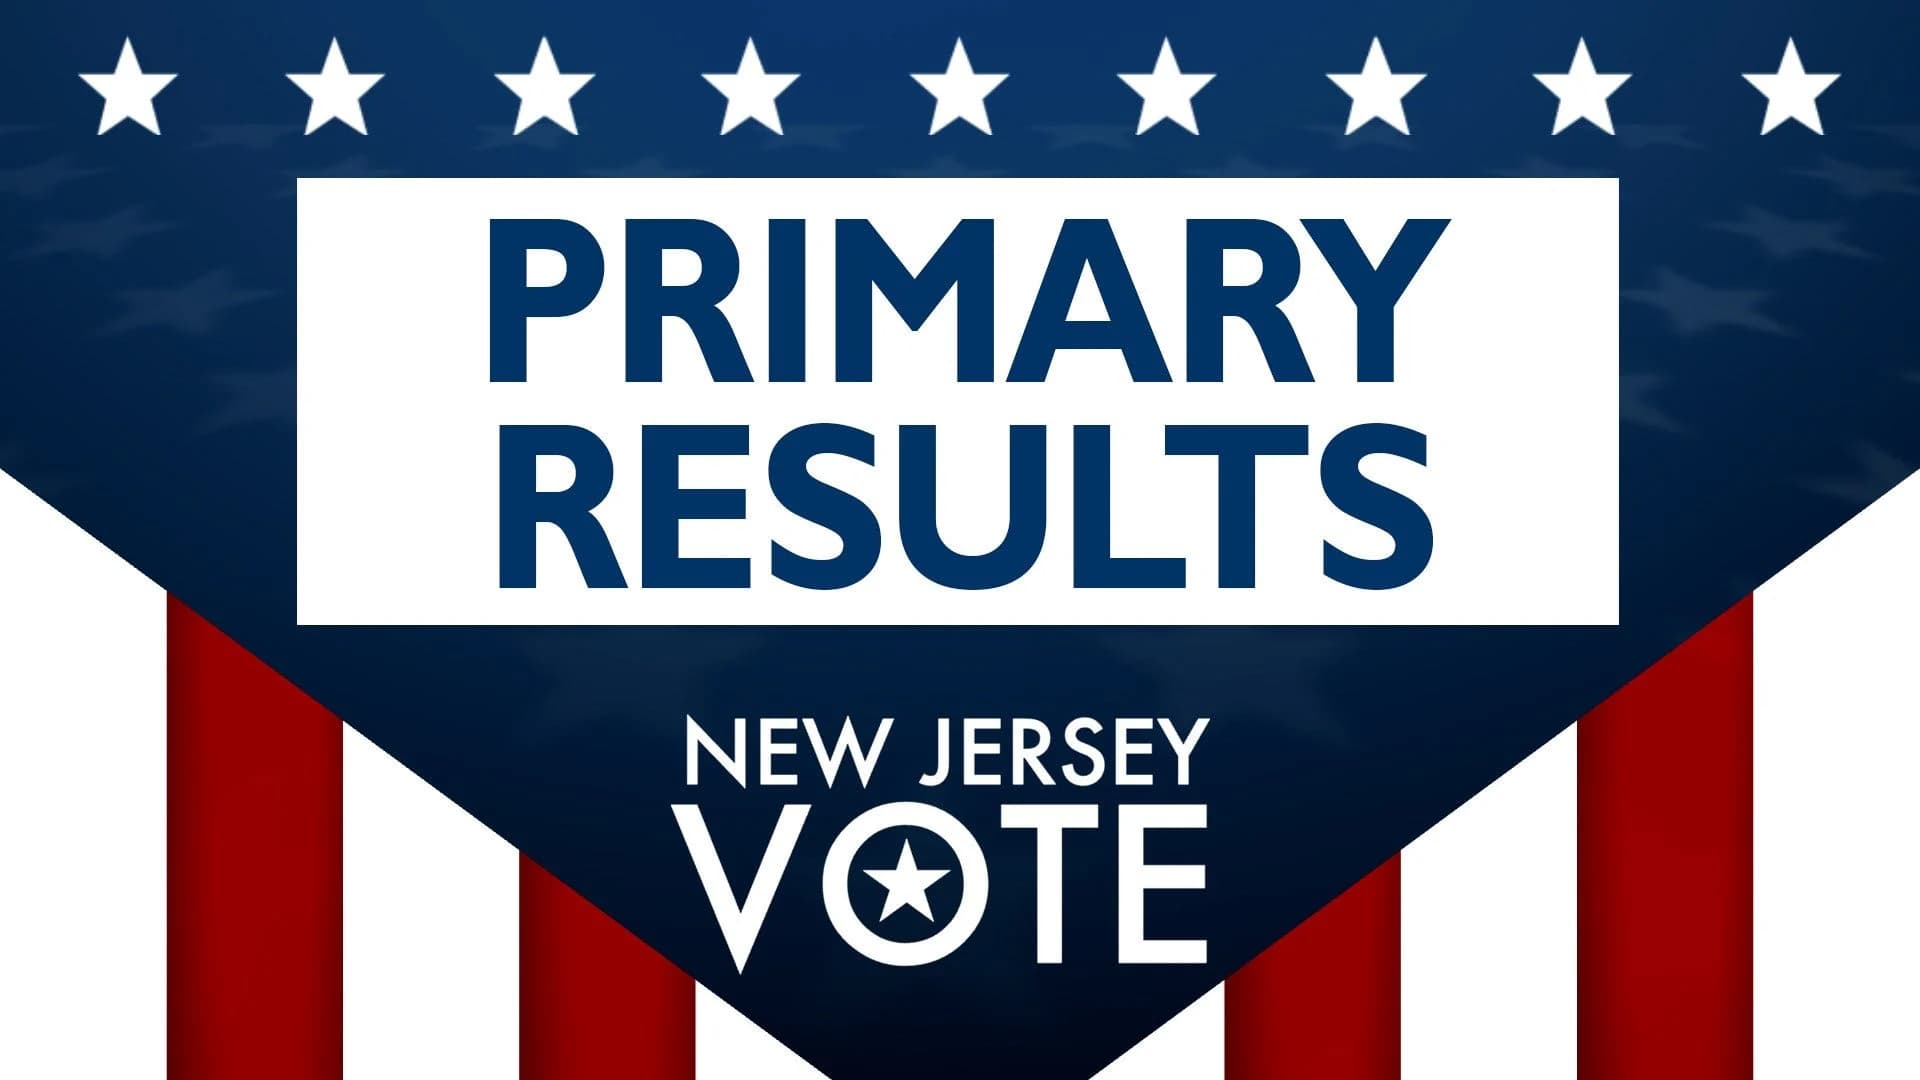 News 12 New Jersey 2017 primary results